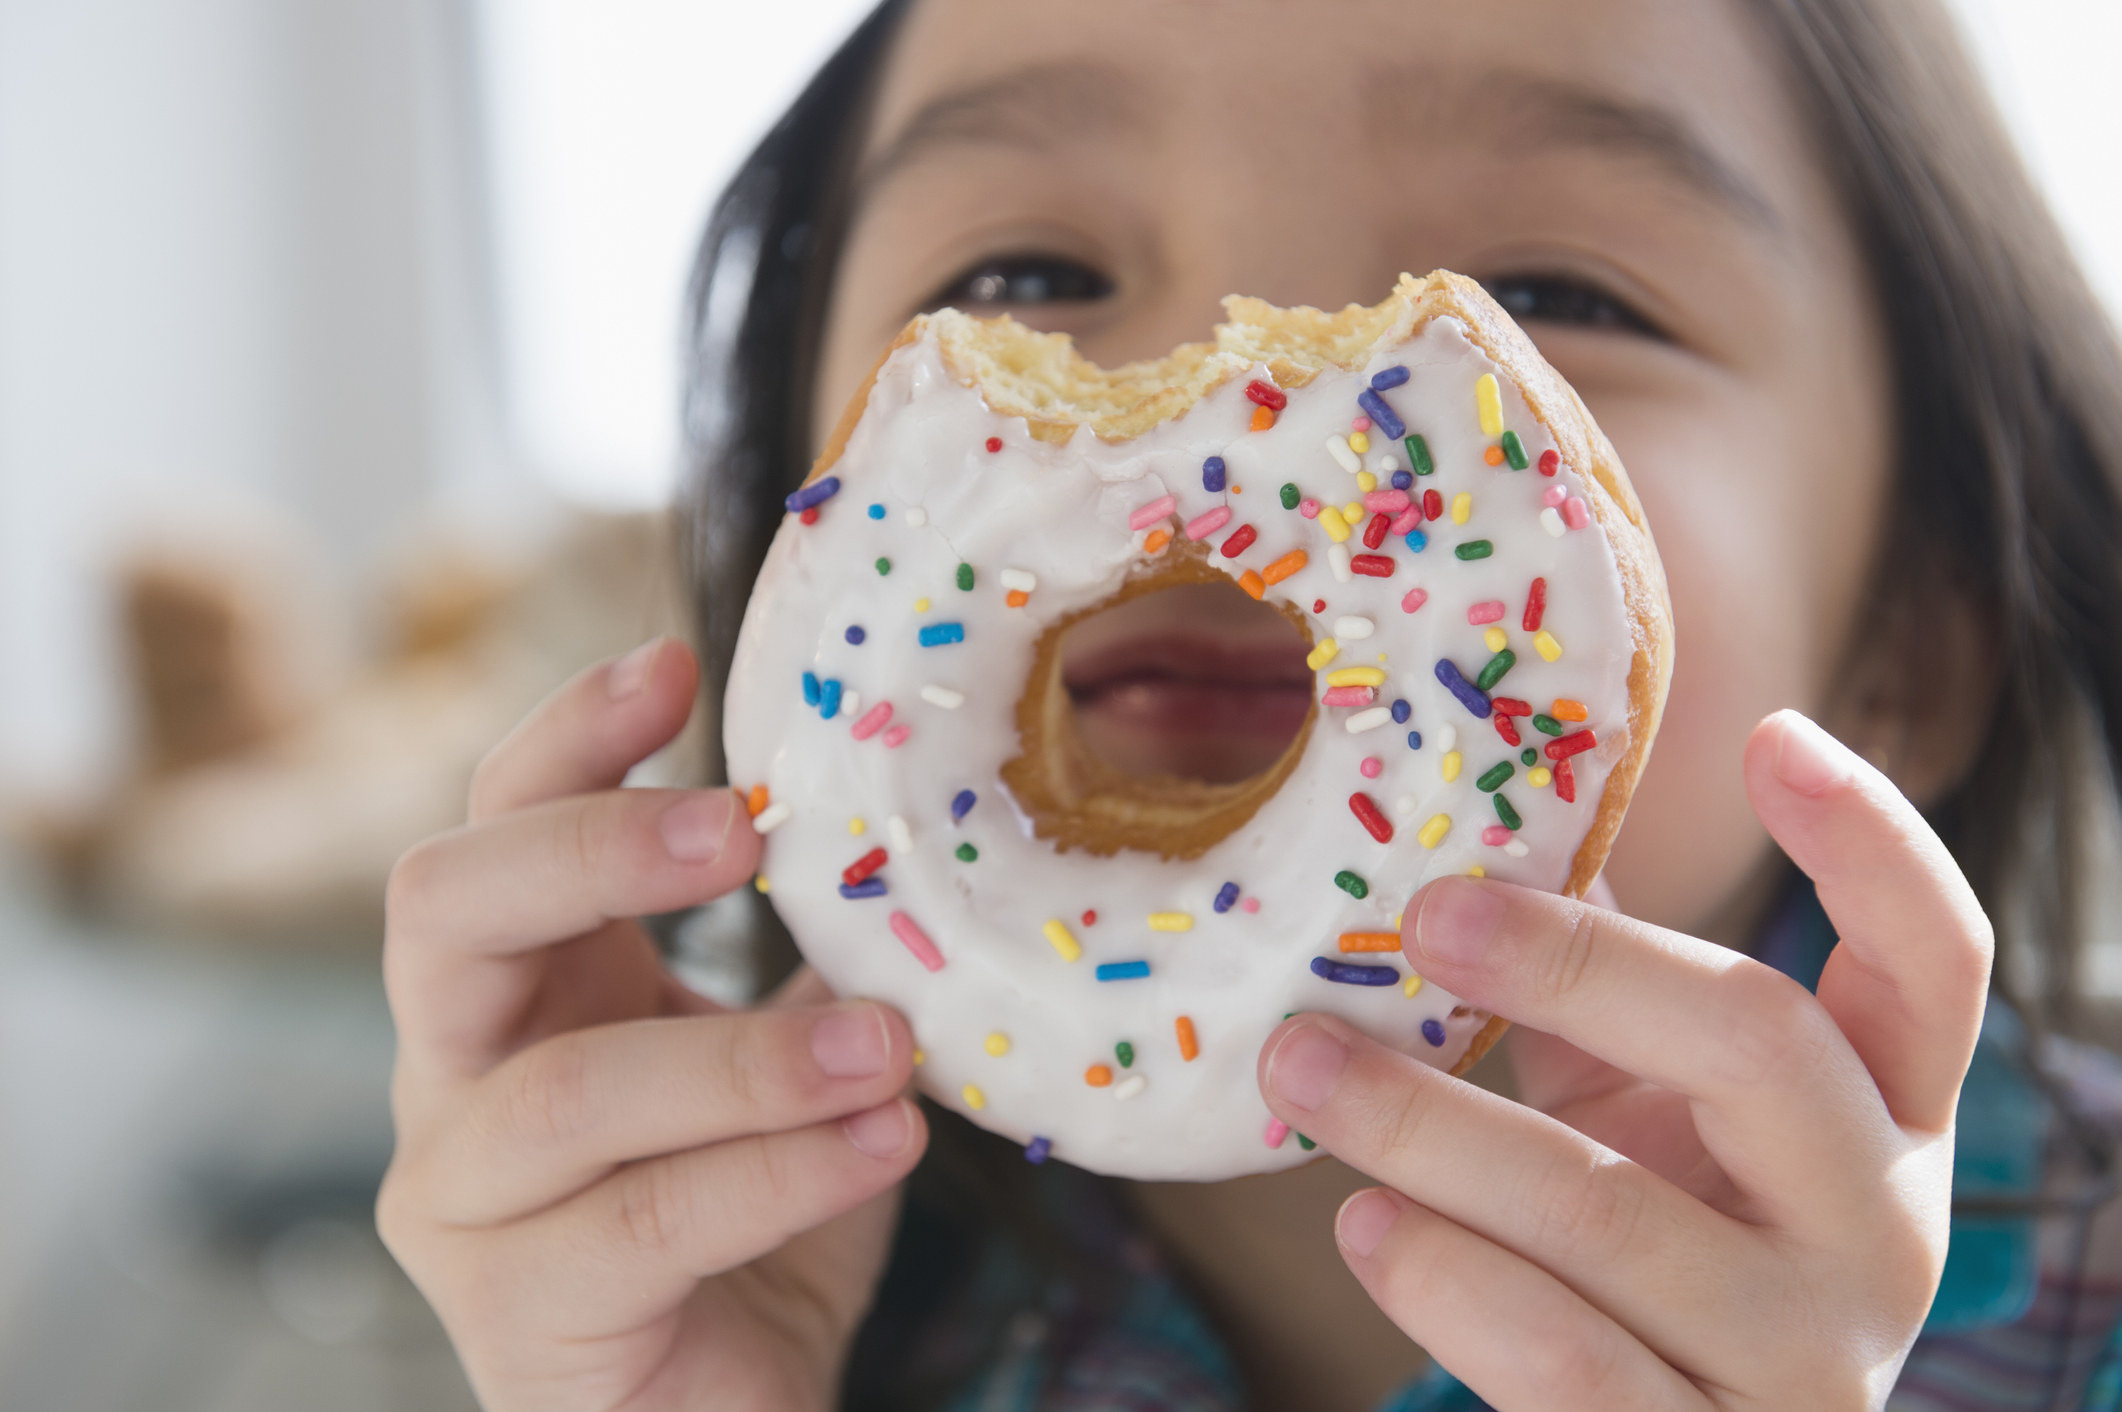 A little girl eating a donut and smiling